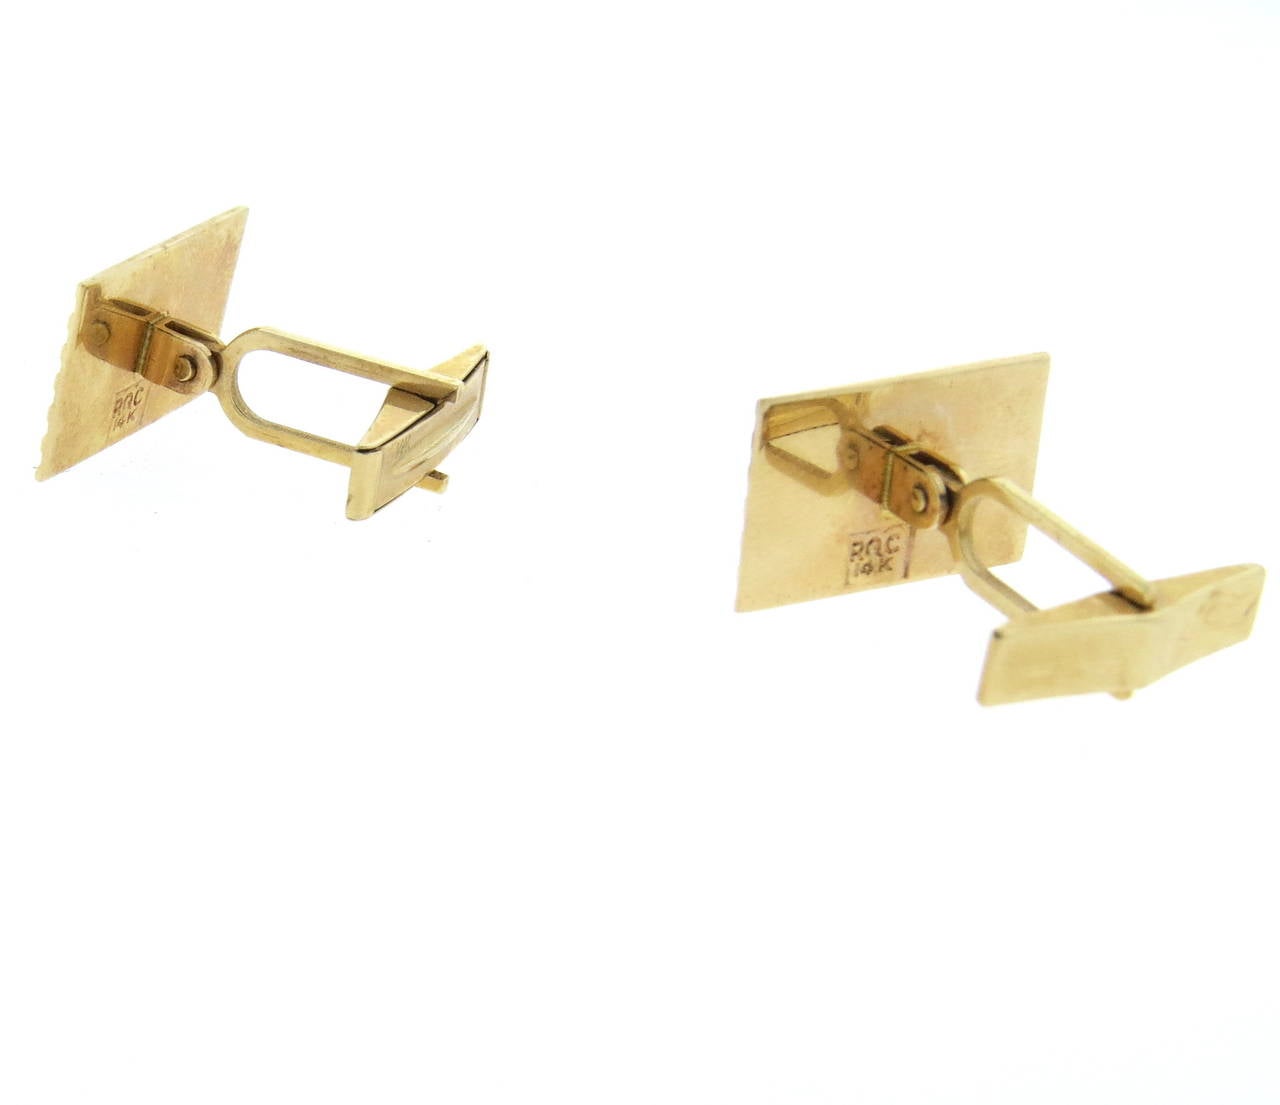 14k gold cufflinks, featuring American flag top, measuring 20mm x 13mm. Weight - 7.4 grams.